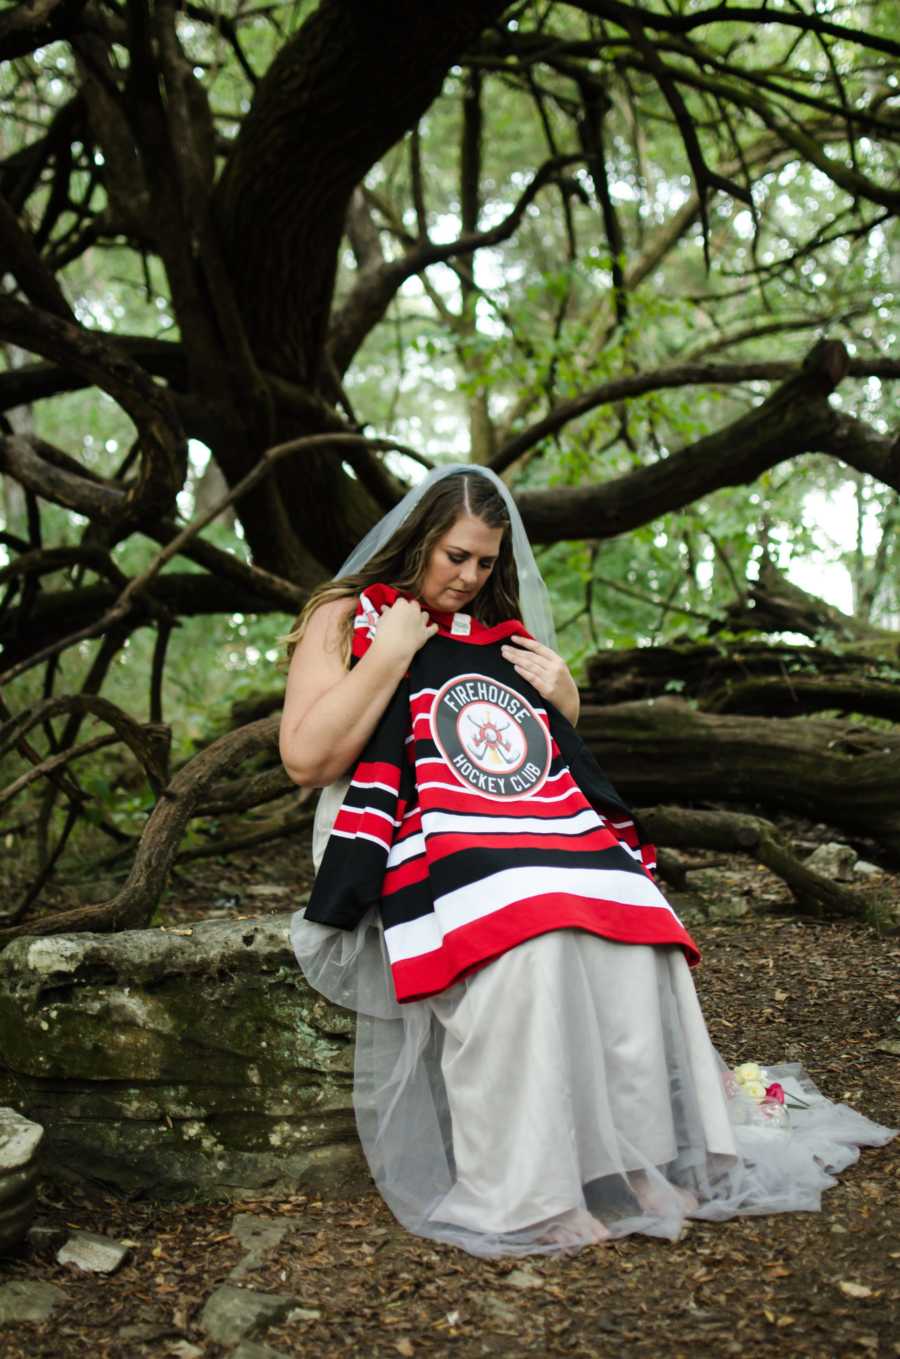 Woman sits on tree trunk in forest wearing wedding dress holding up late husband's hockey jersey